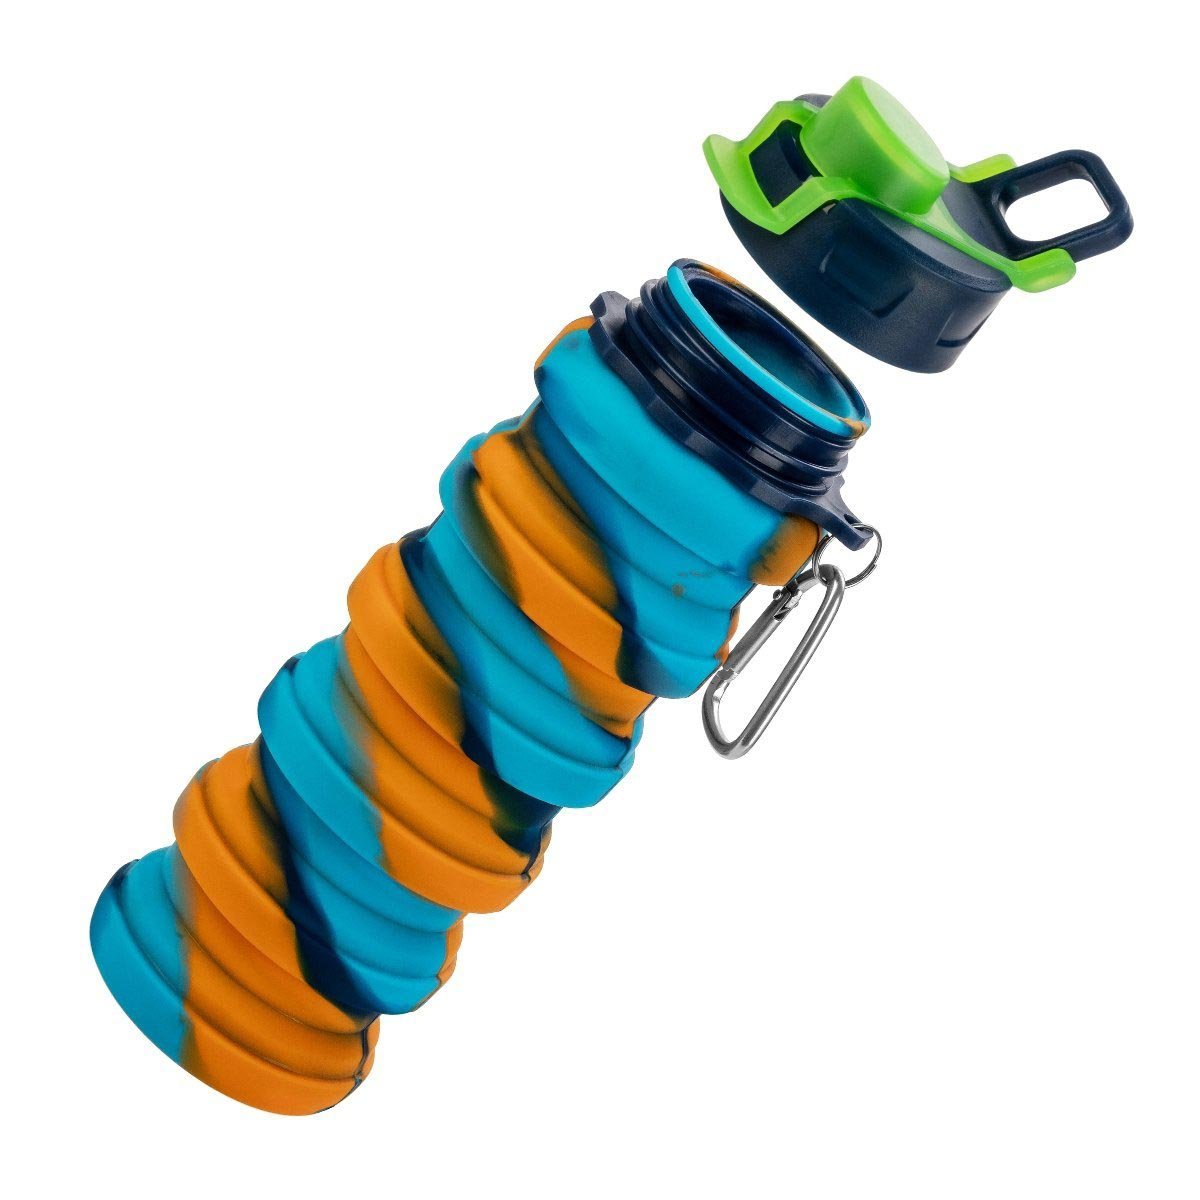 Collapsible Teal Water Bottle